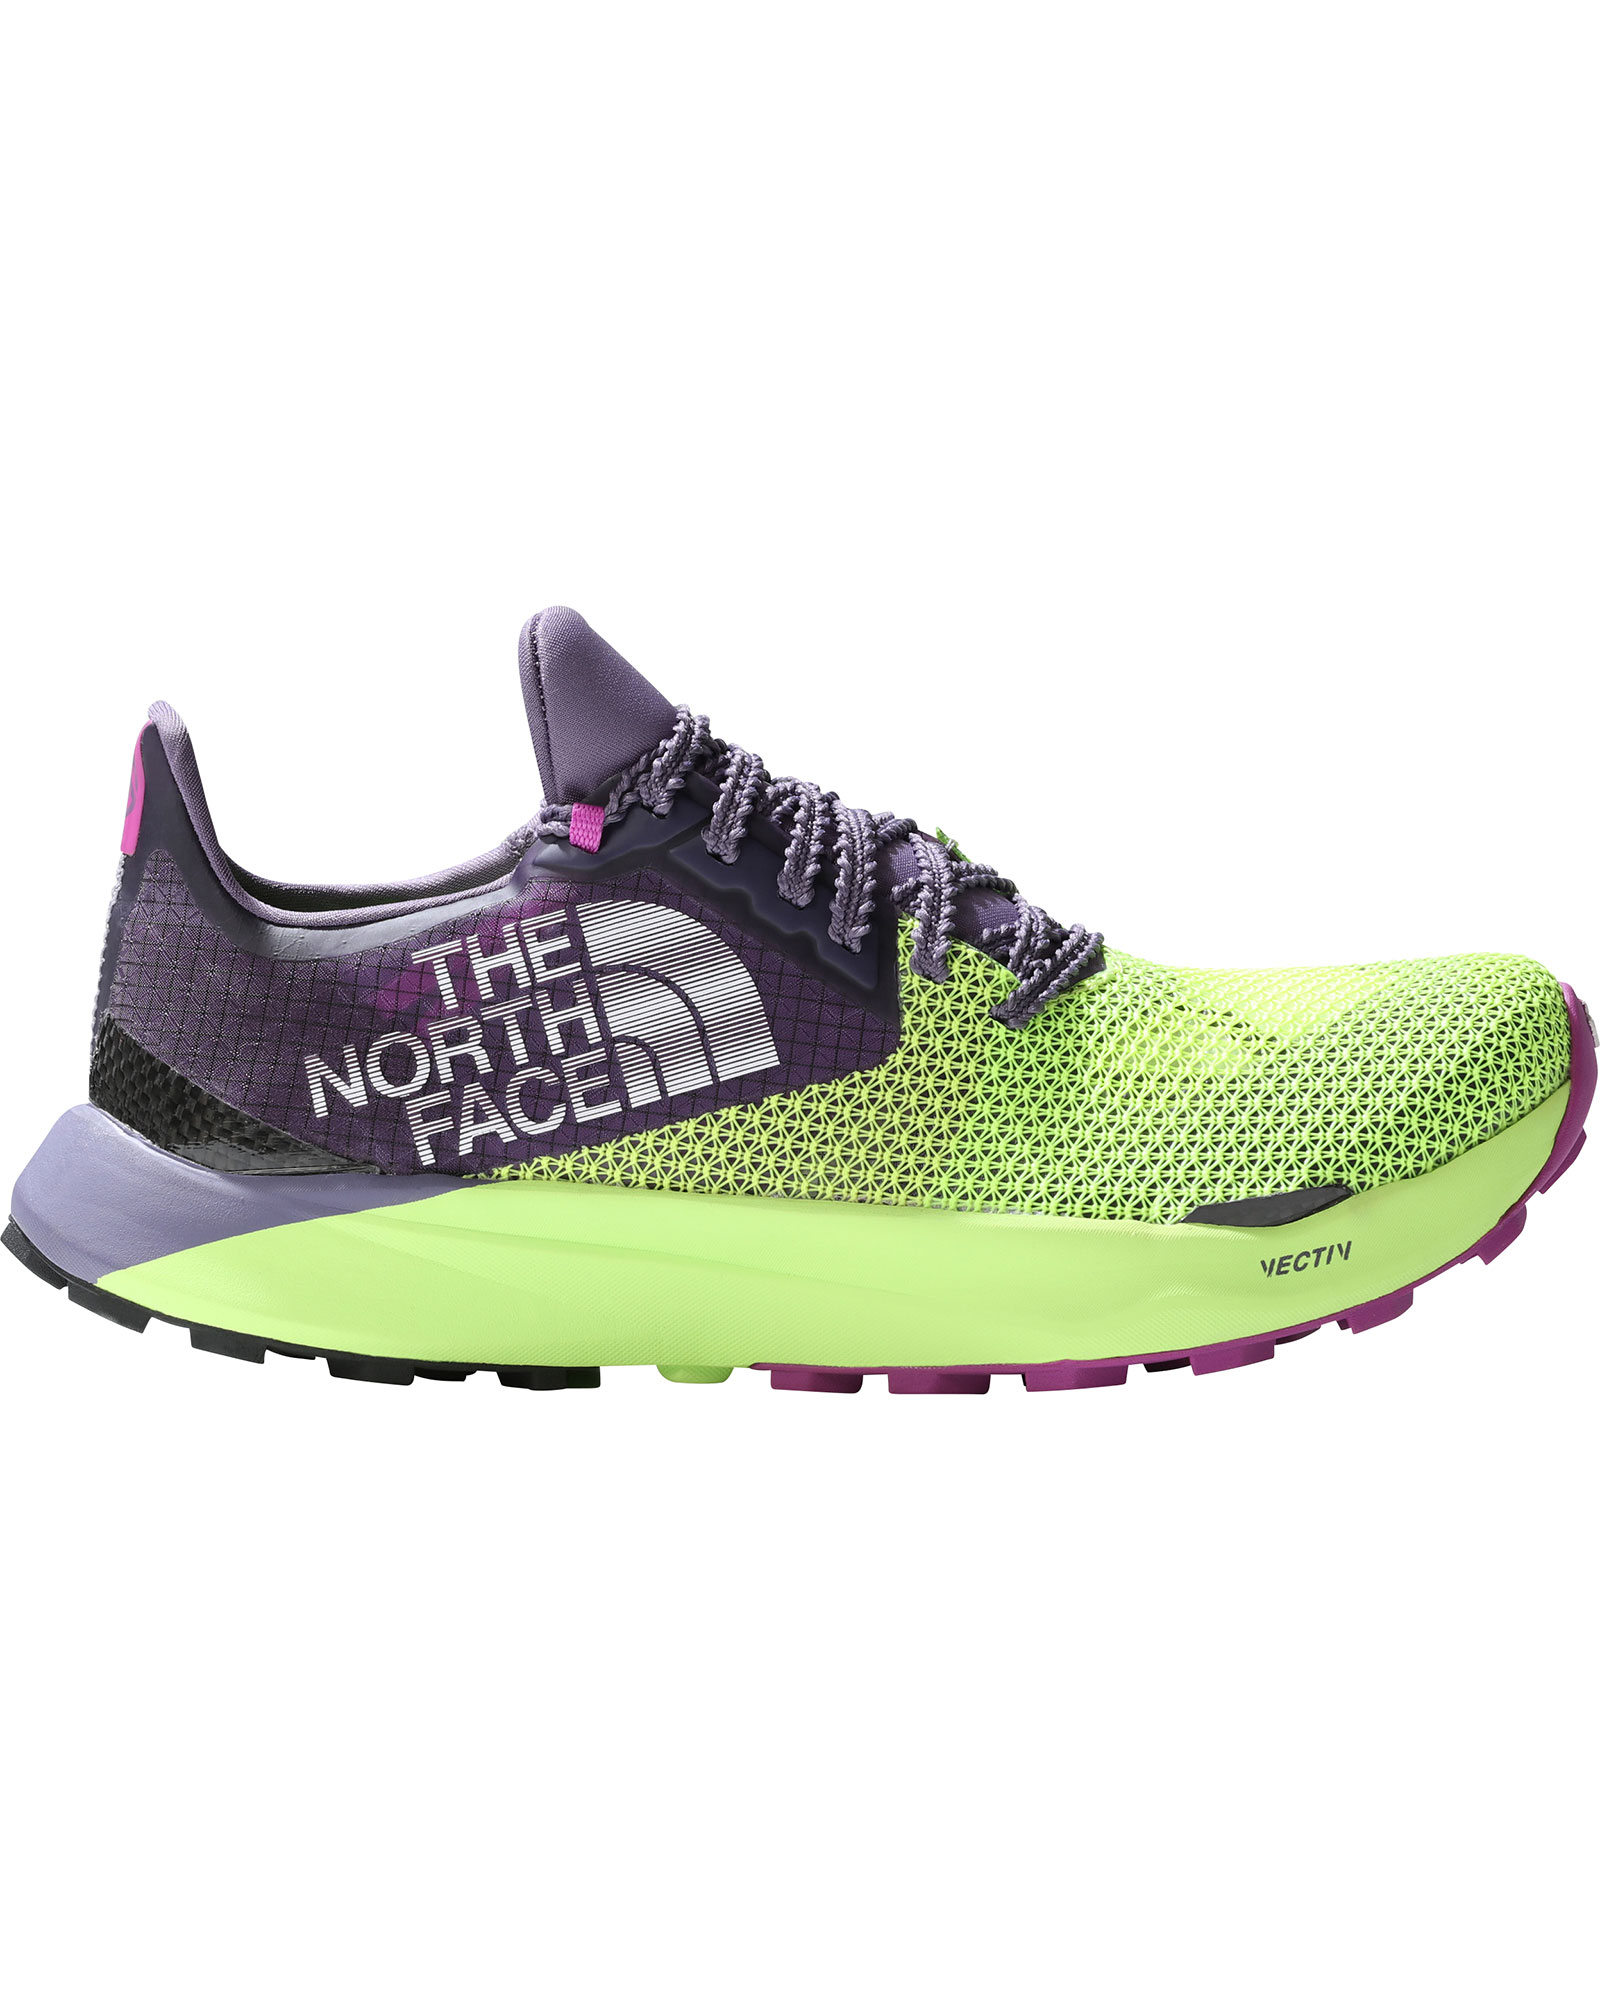 The North Face Summit Vectiv Sky Women’s Trail Shoes - LED Yellow/Lunar Slate UK 7